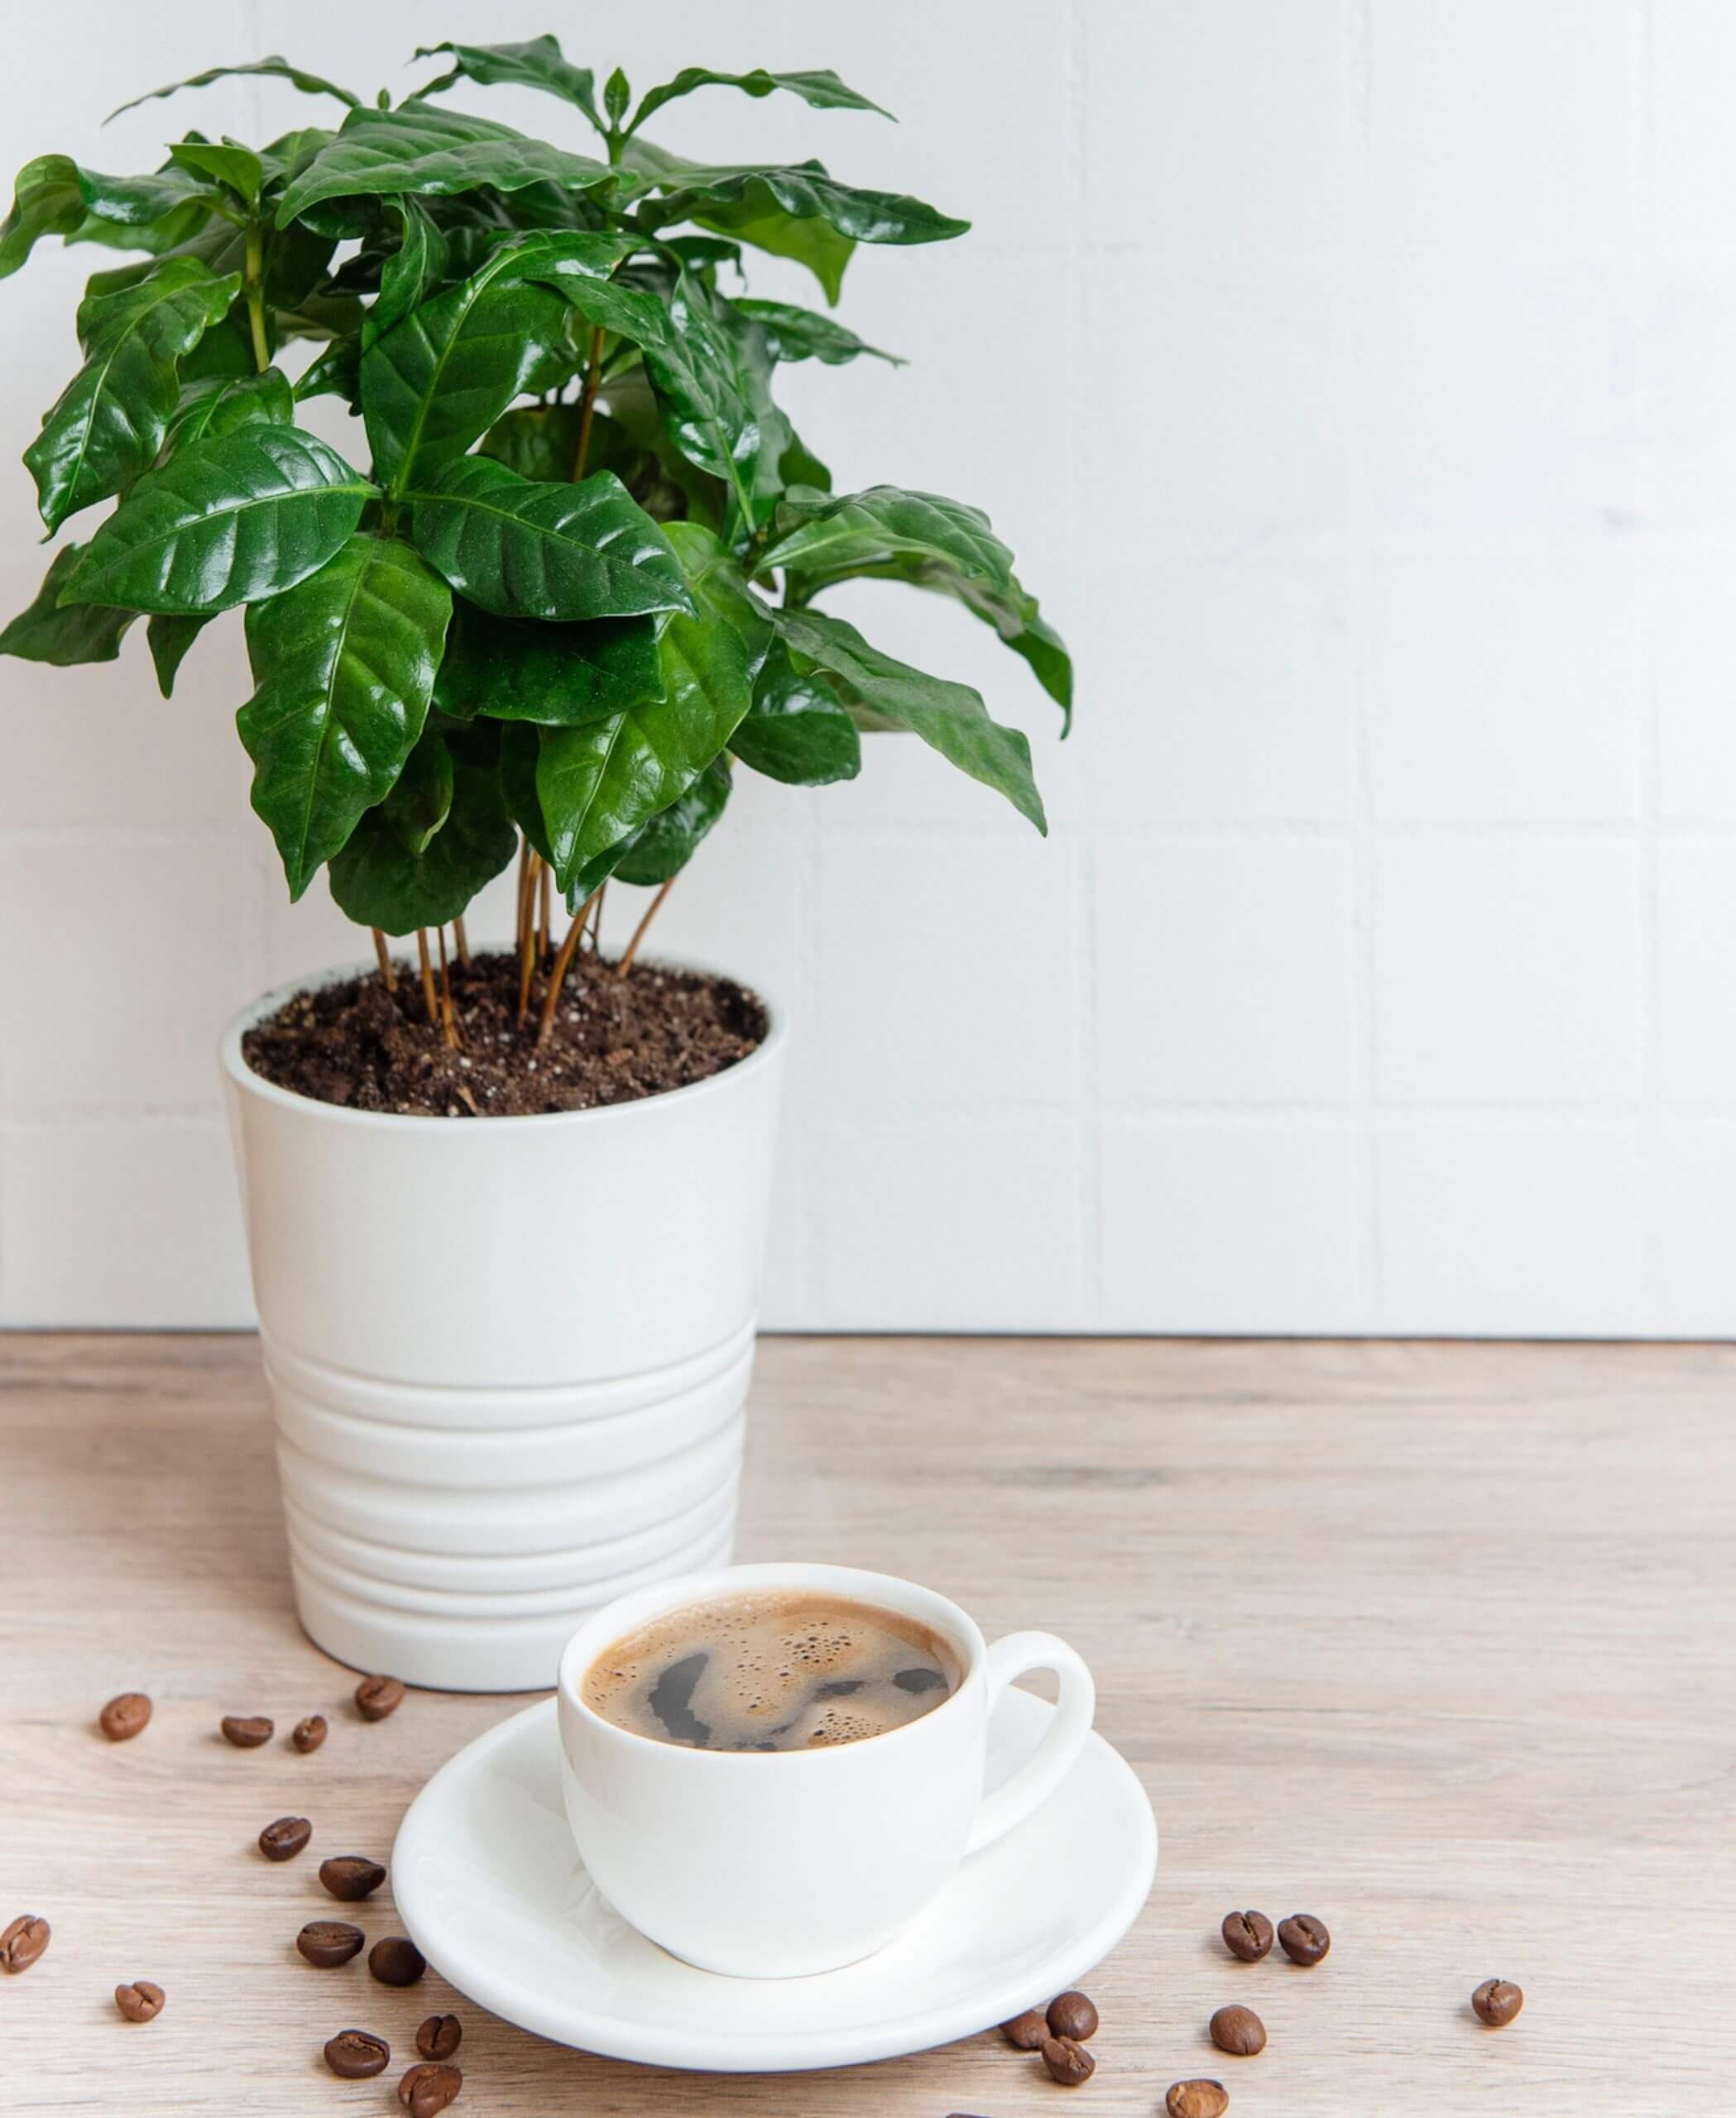 Coffee Plant 101: How to Care for Coffee Plants